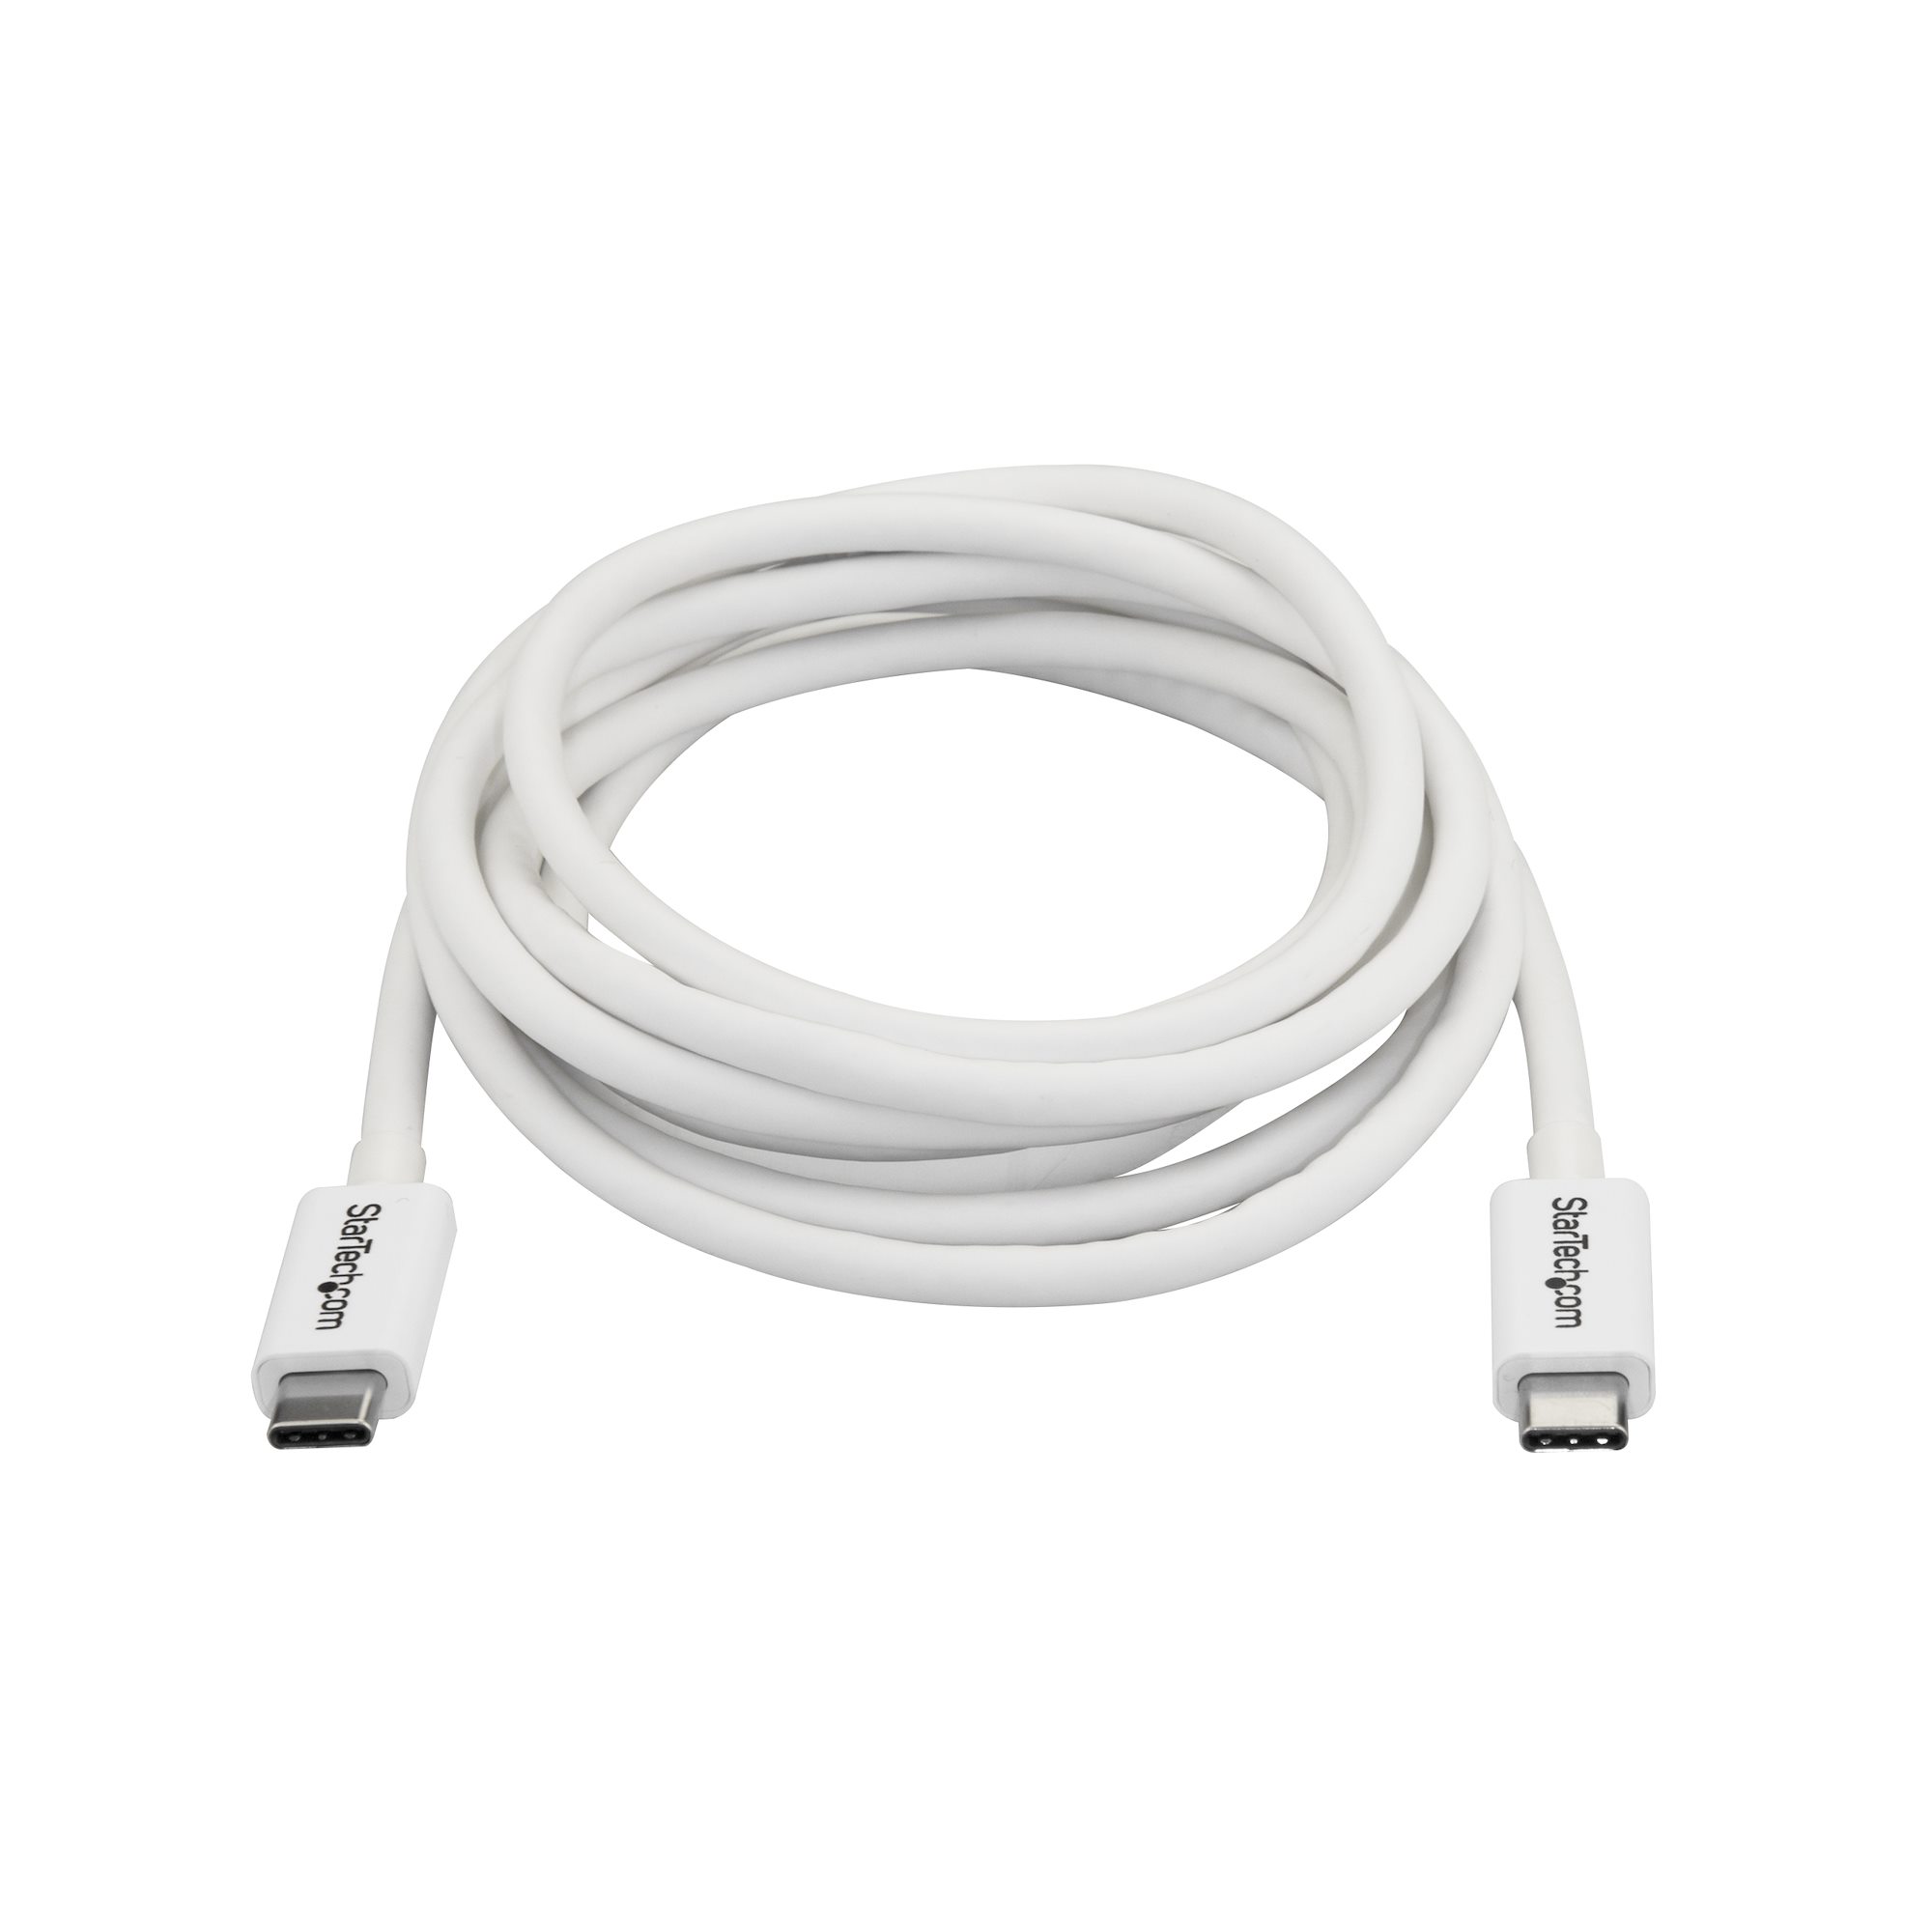 Cable 2m Thunderbolt 3 USB-C 20Gbps - Cables y adaptadores